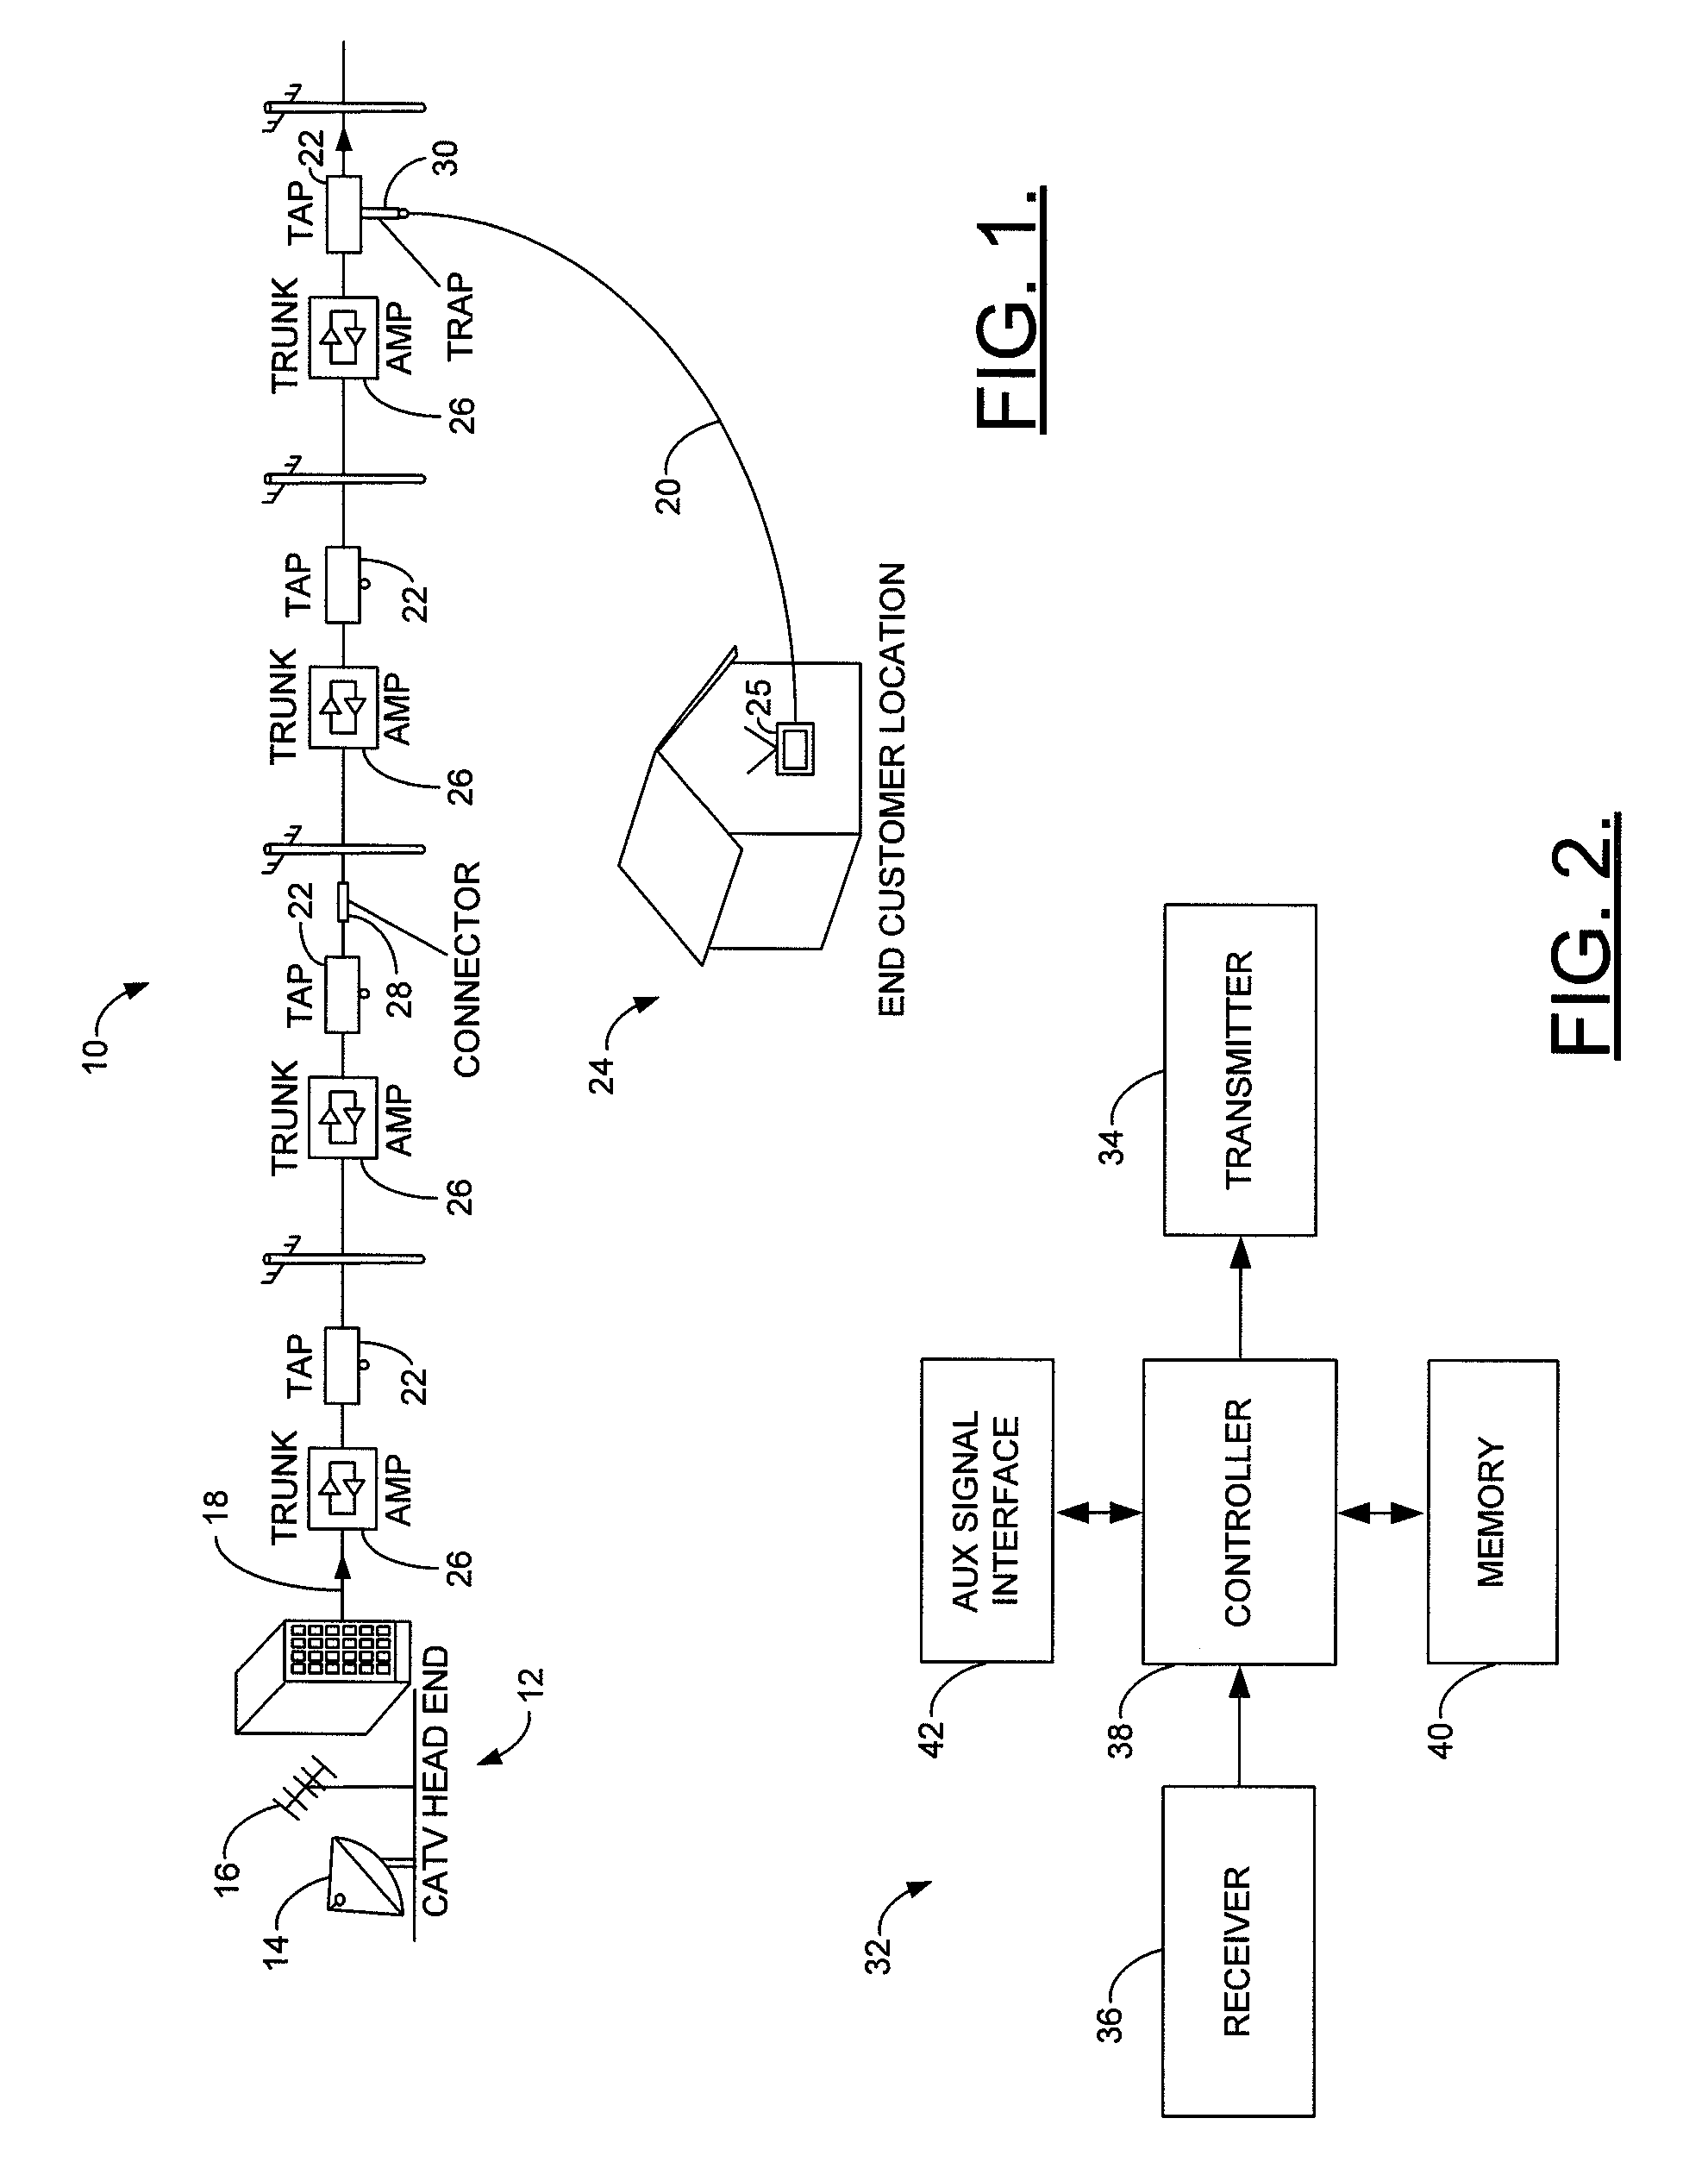 Apparatus and method for embedding/detecting an auxiliary signal within a CATV traffic stream